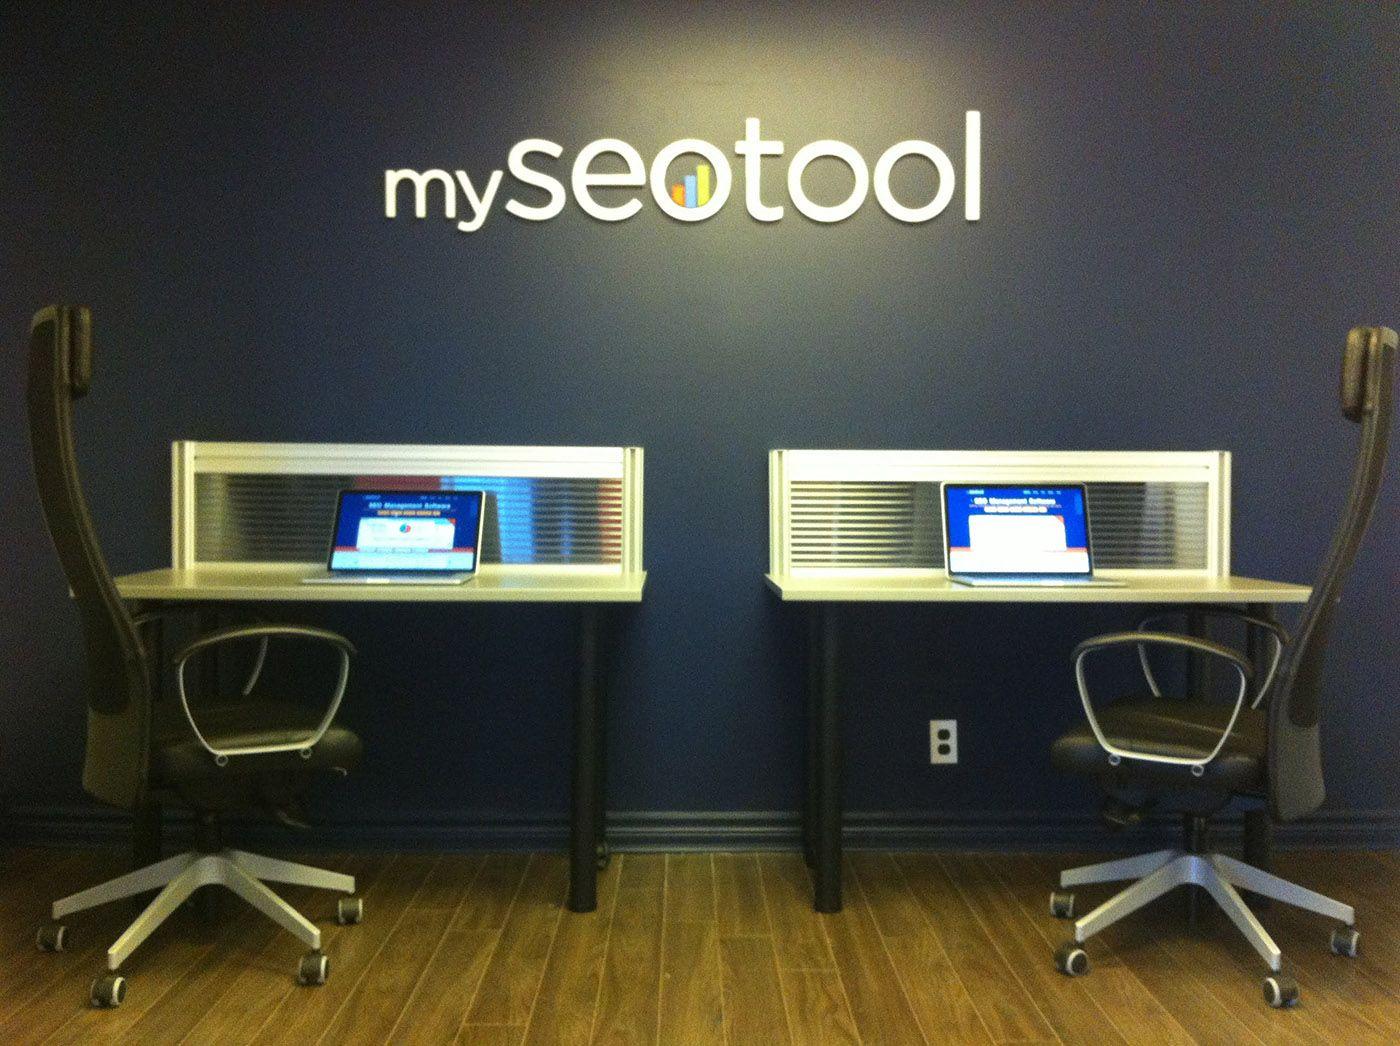 MySEOTool image from 2012